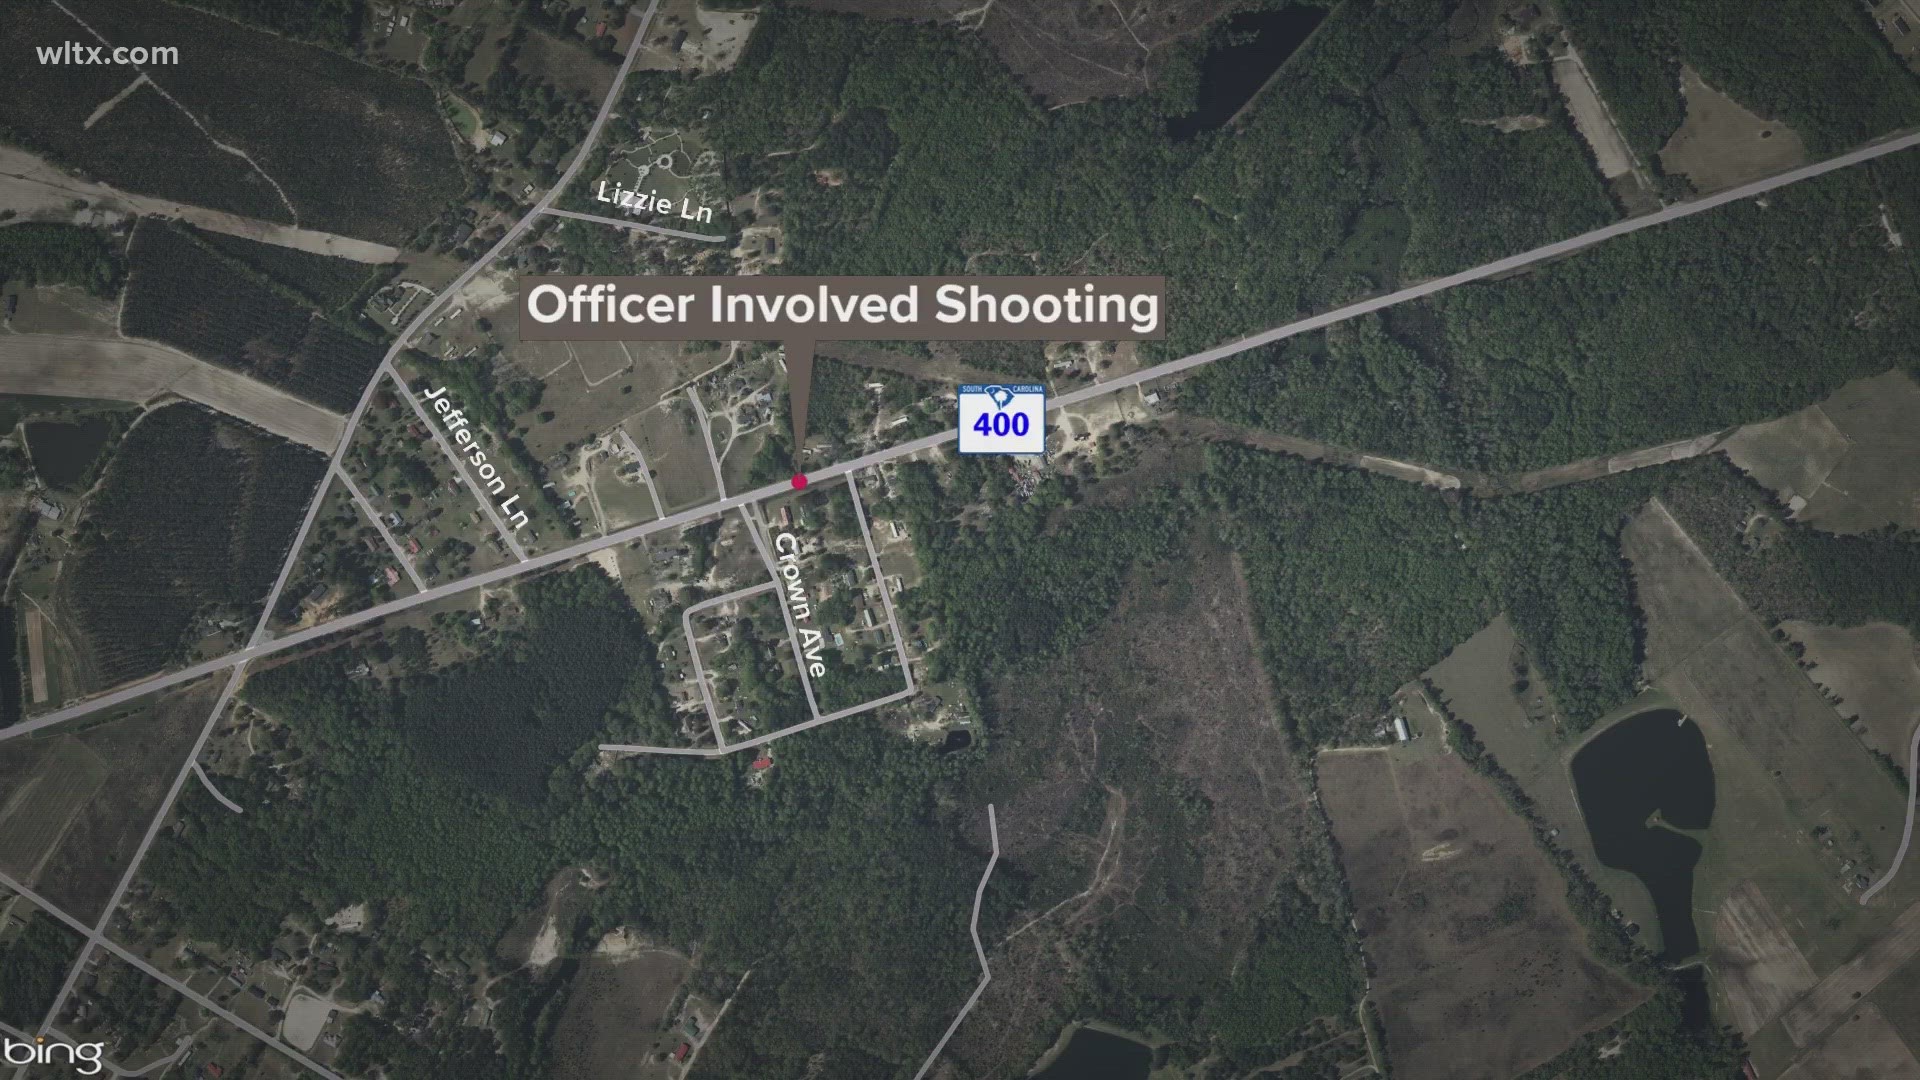 The shooting happened on Norway Road around 10:30 a.m., but the sheriff said no one was wounded.